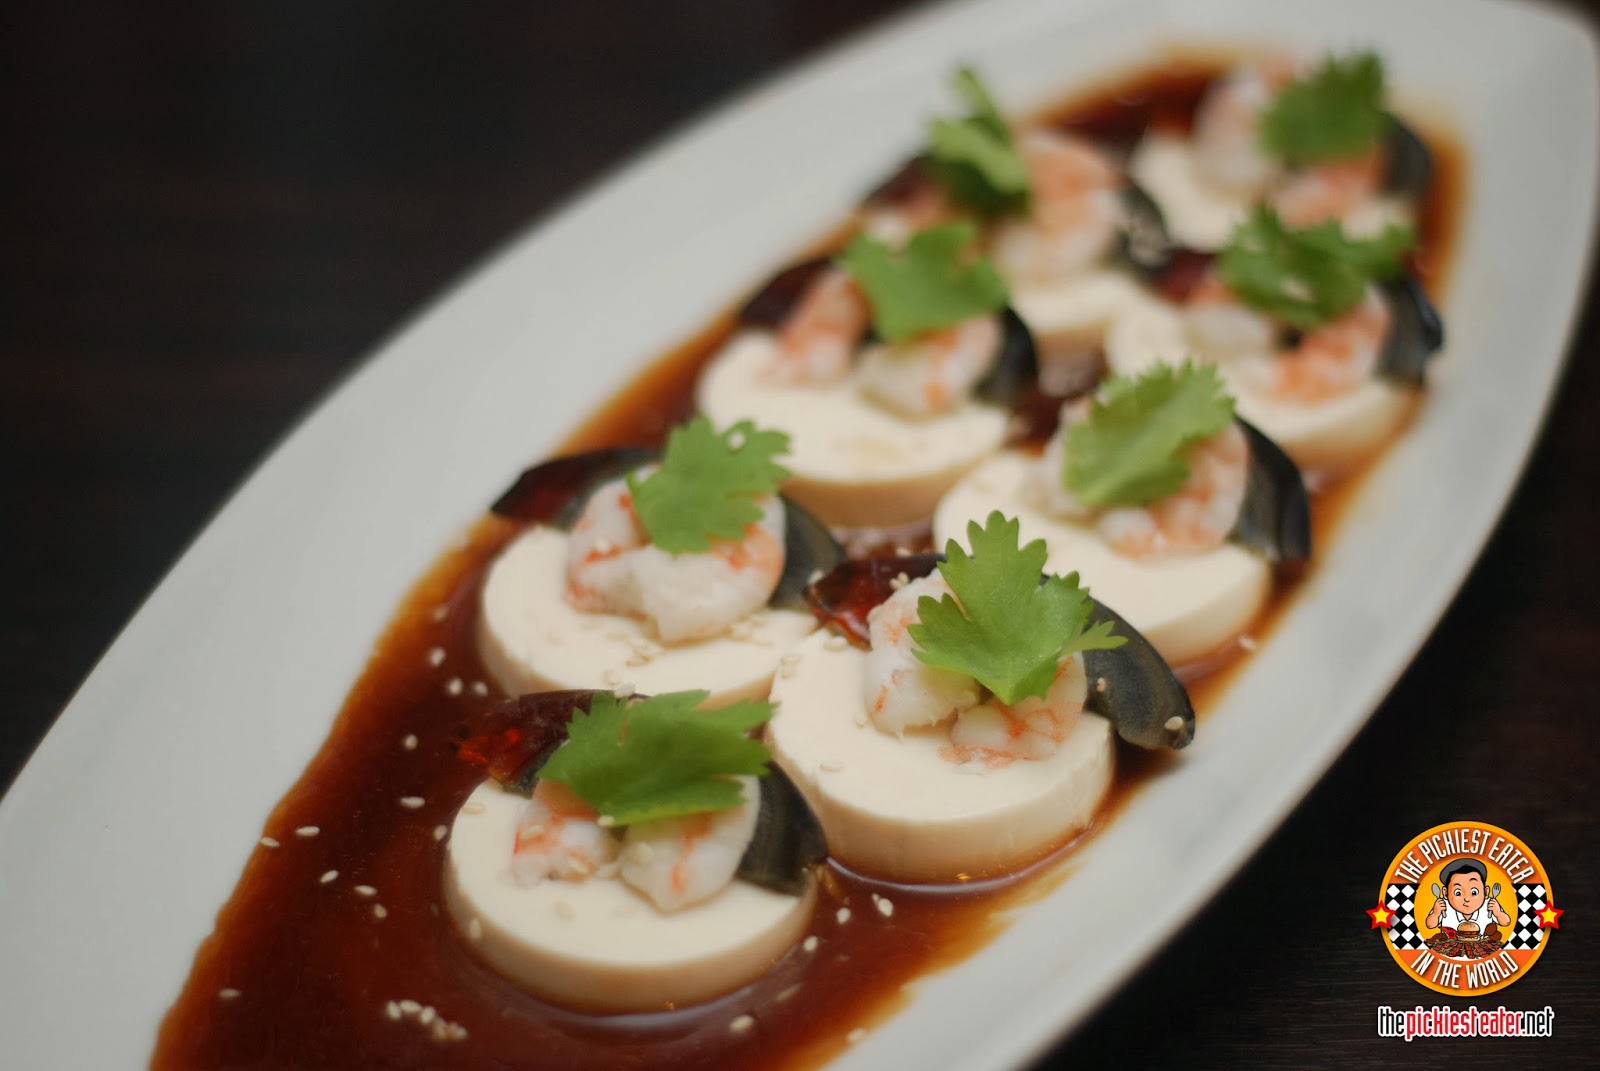 Shrimp with Century Egg and Chilled Tofu Salad